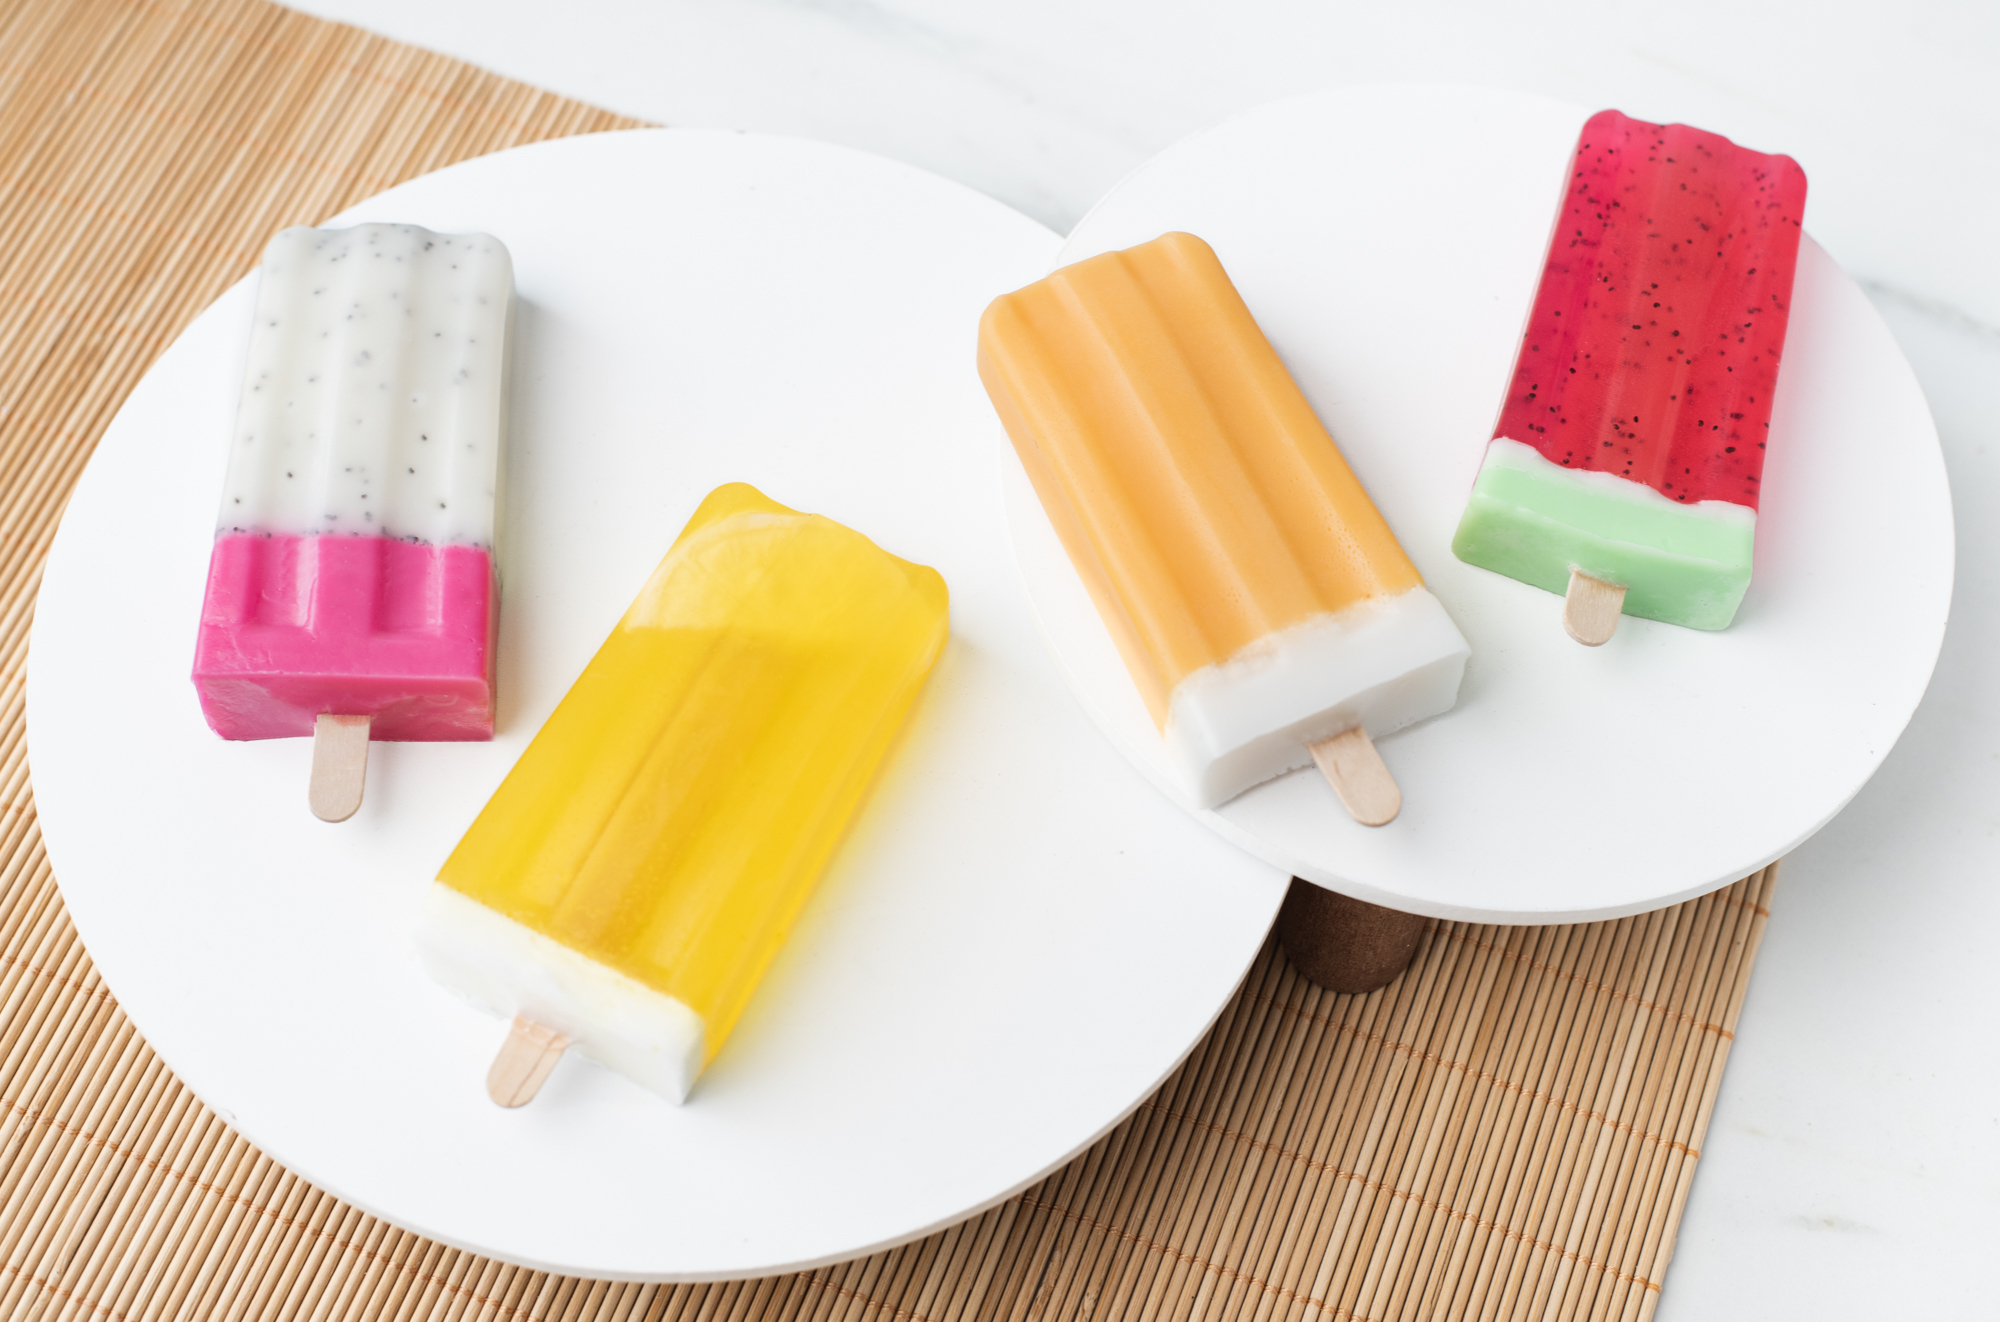 Popsicle soaps